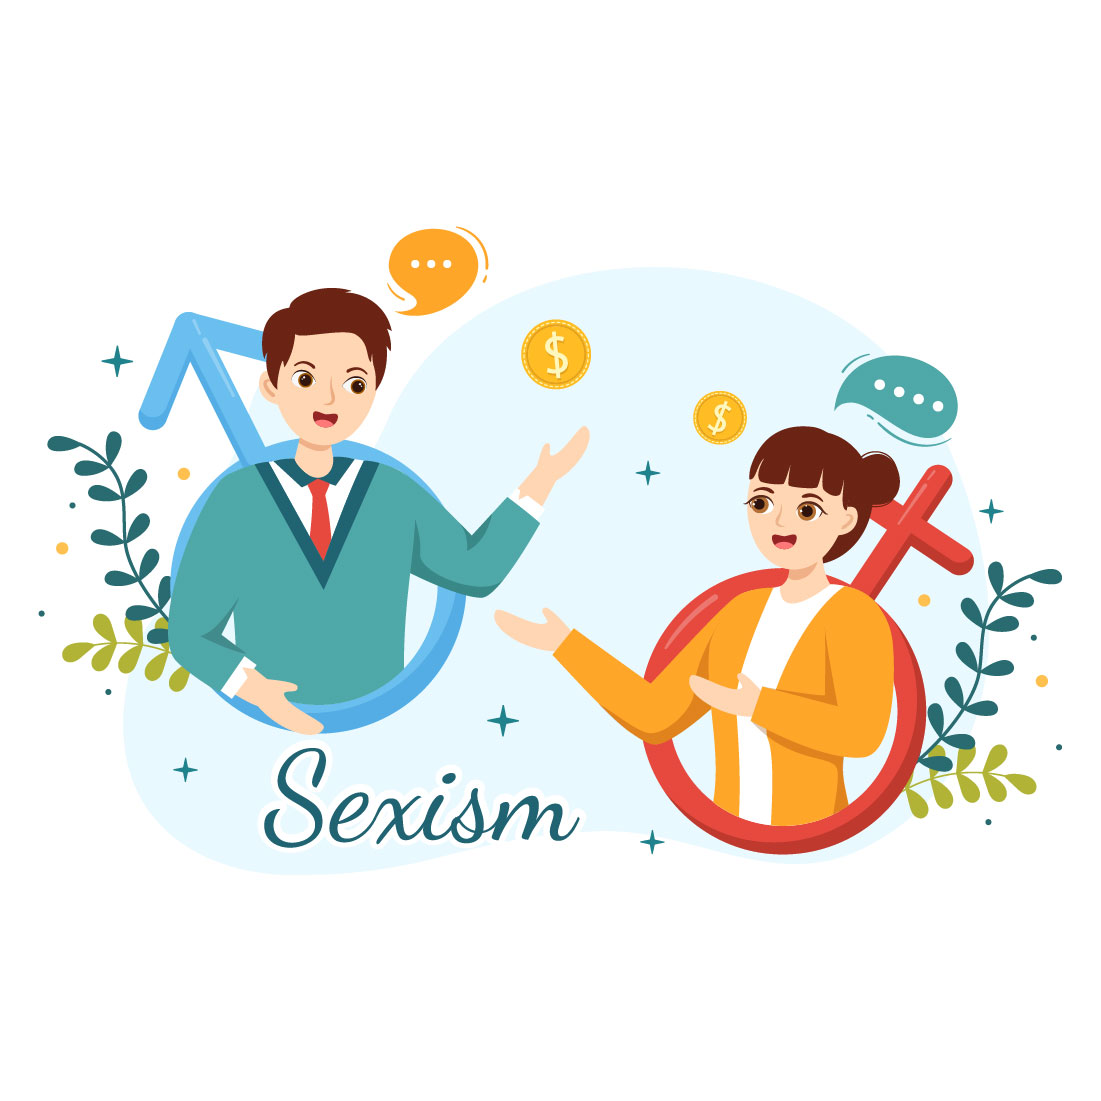 12 Sexism Men and Women Illustration cover image.